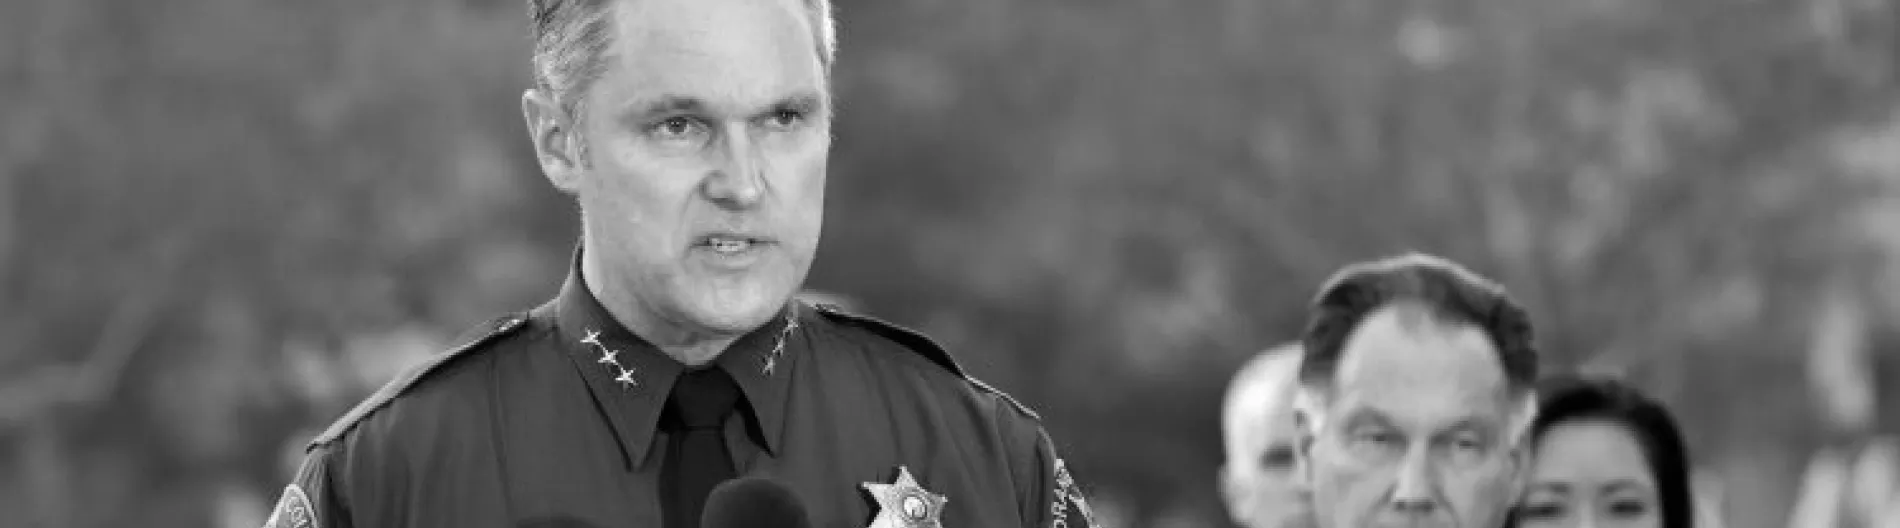 California Sheriff Rejects “Sanctuary” Law